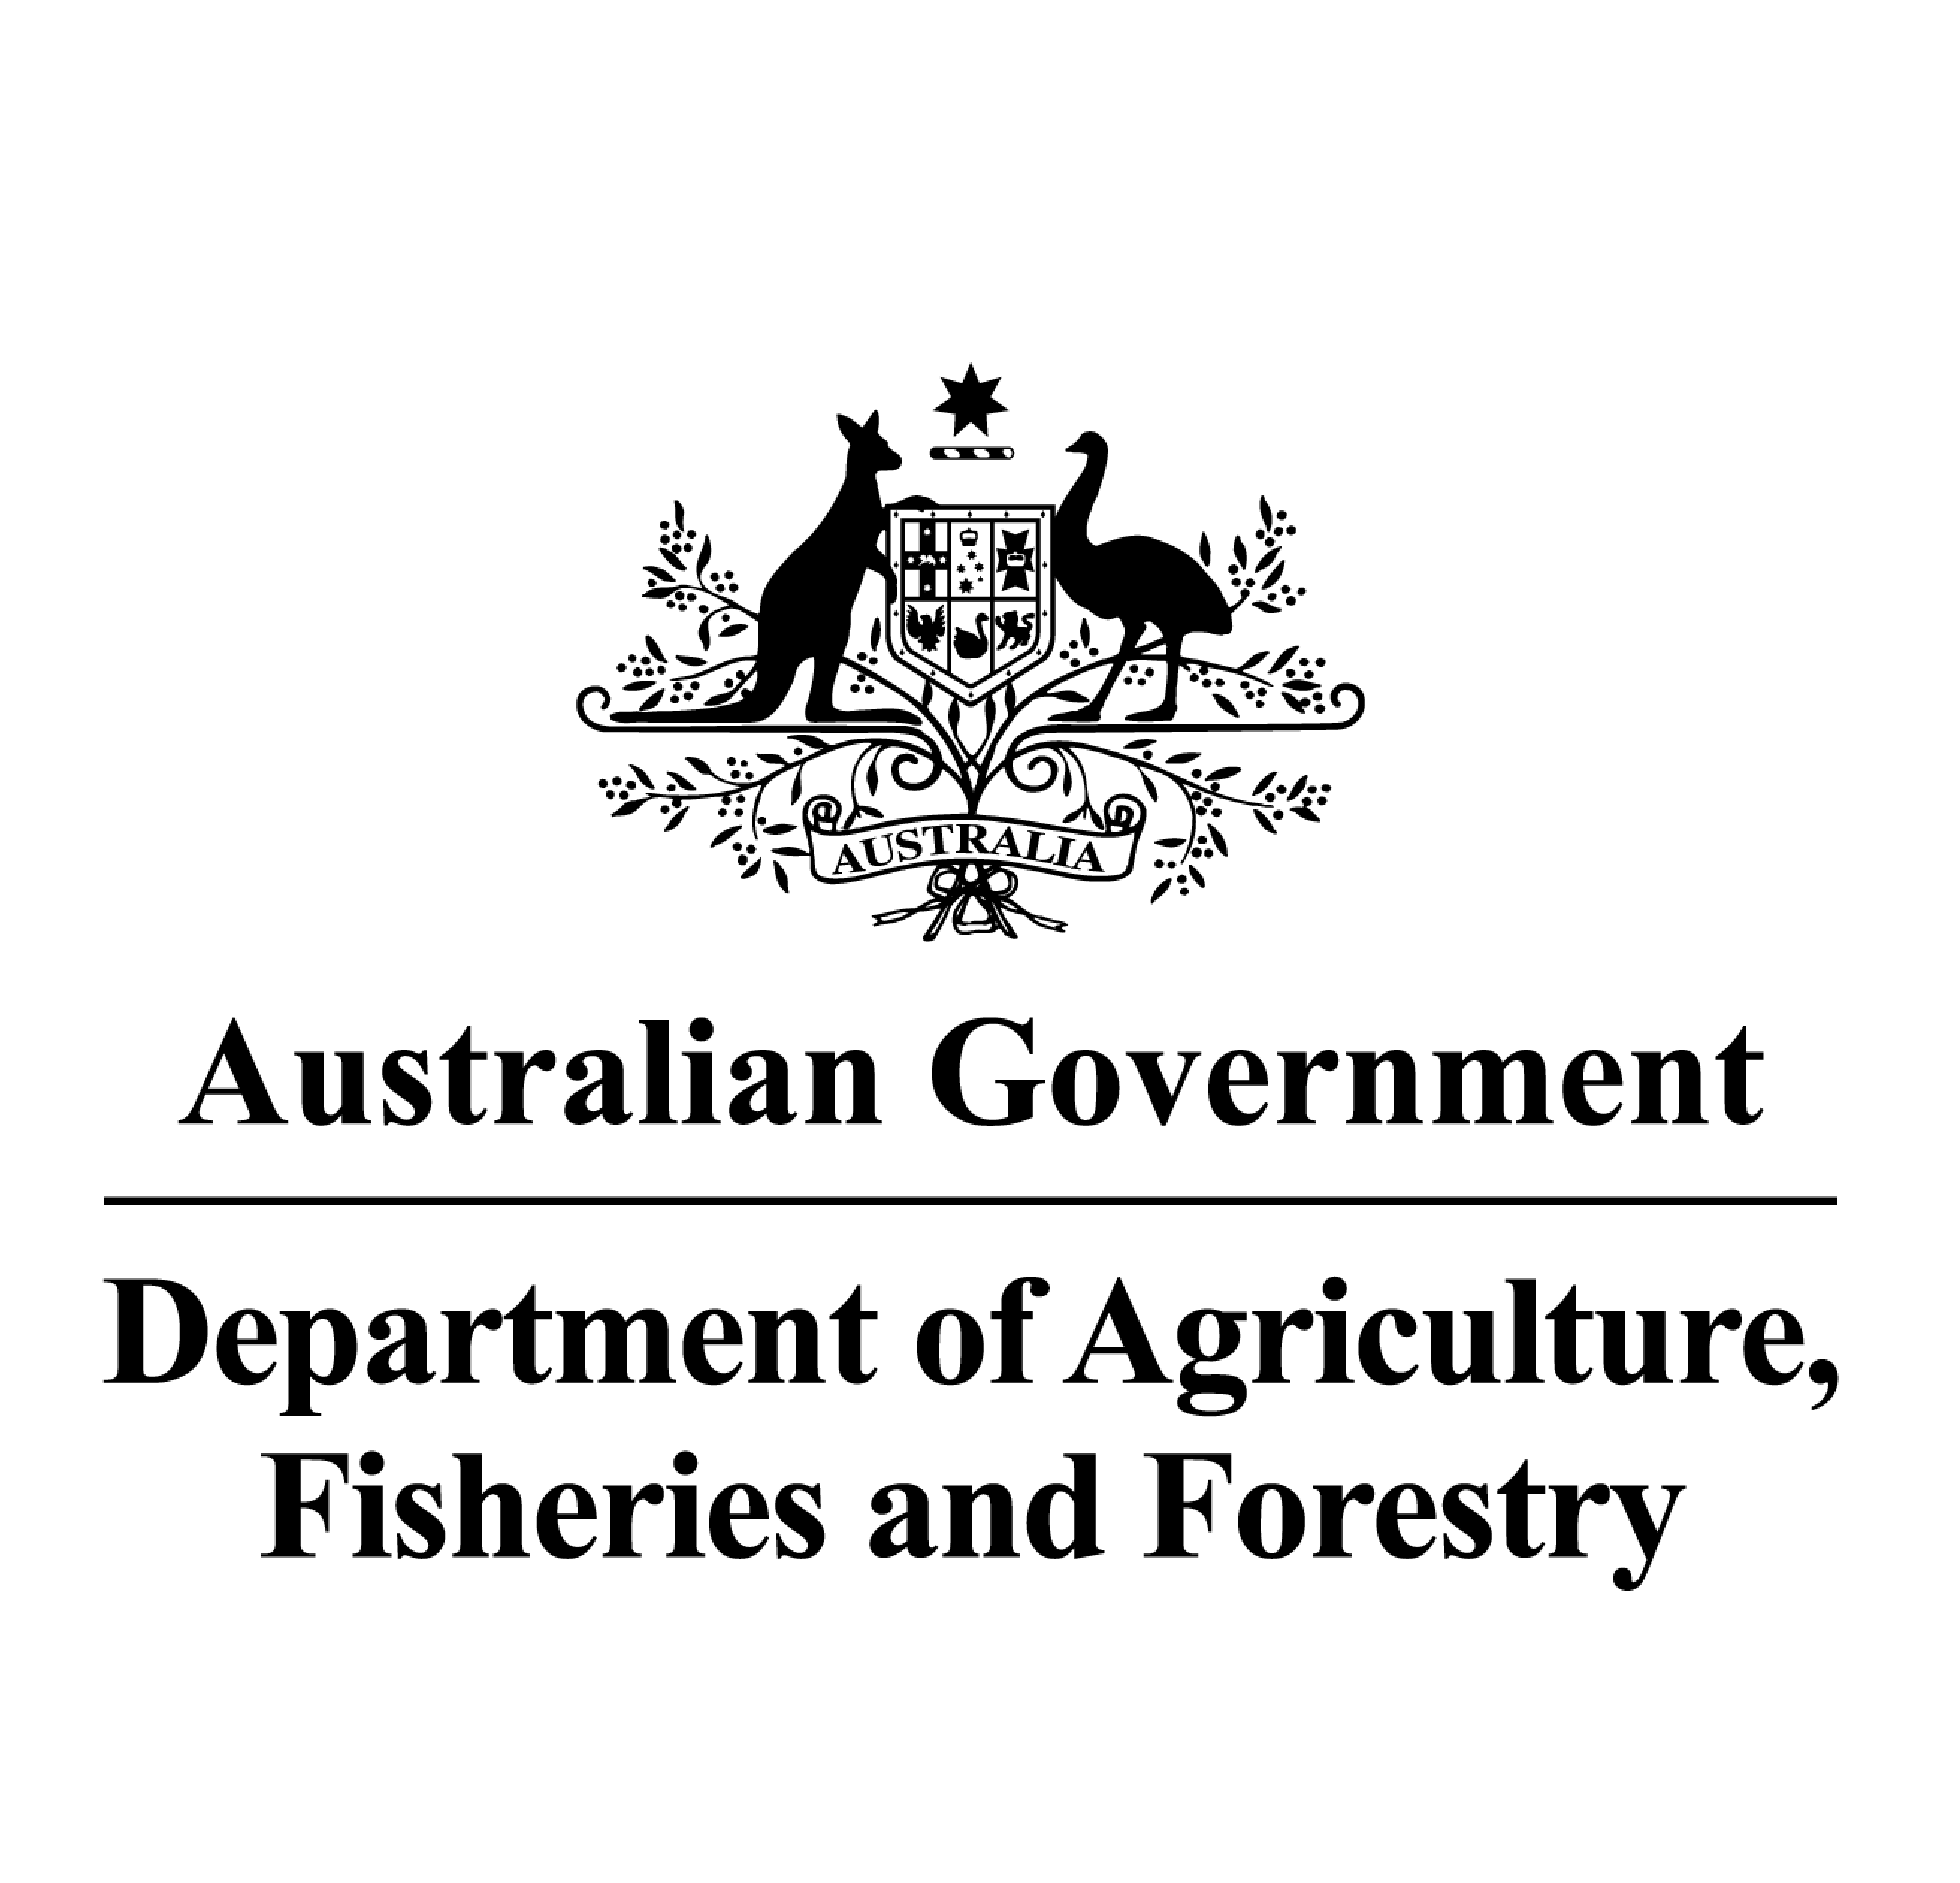 Australian Government Logo - Department of Agriculture, Fisheries and Forestry